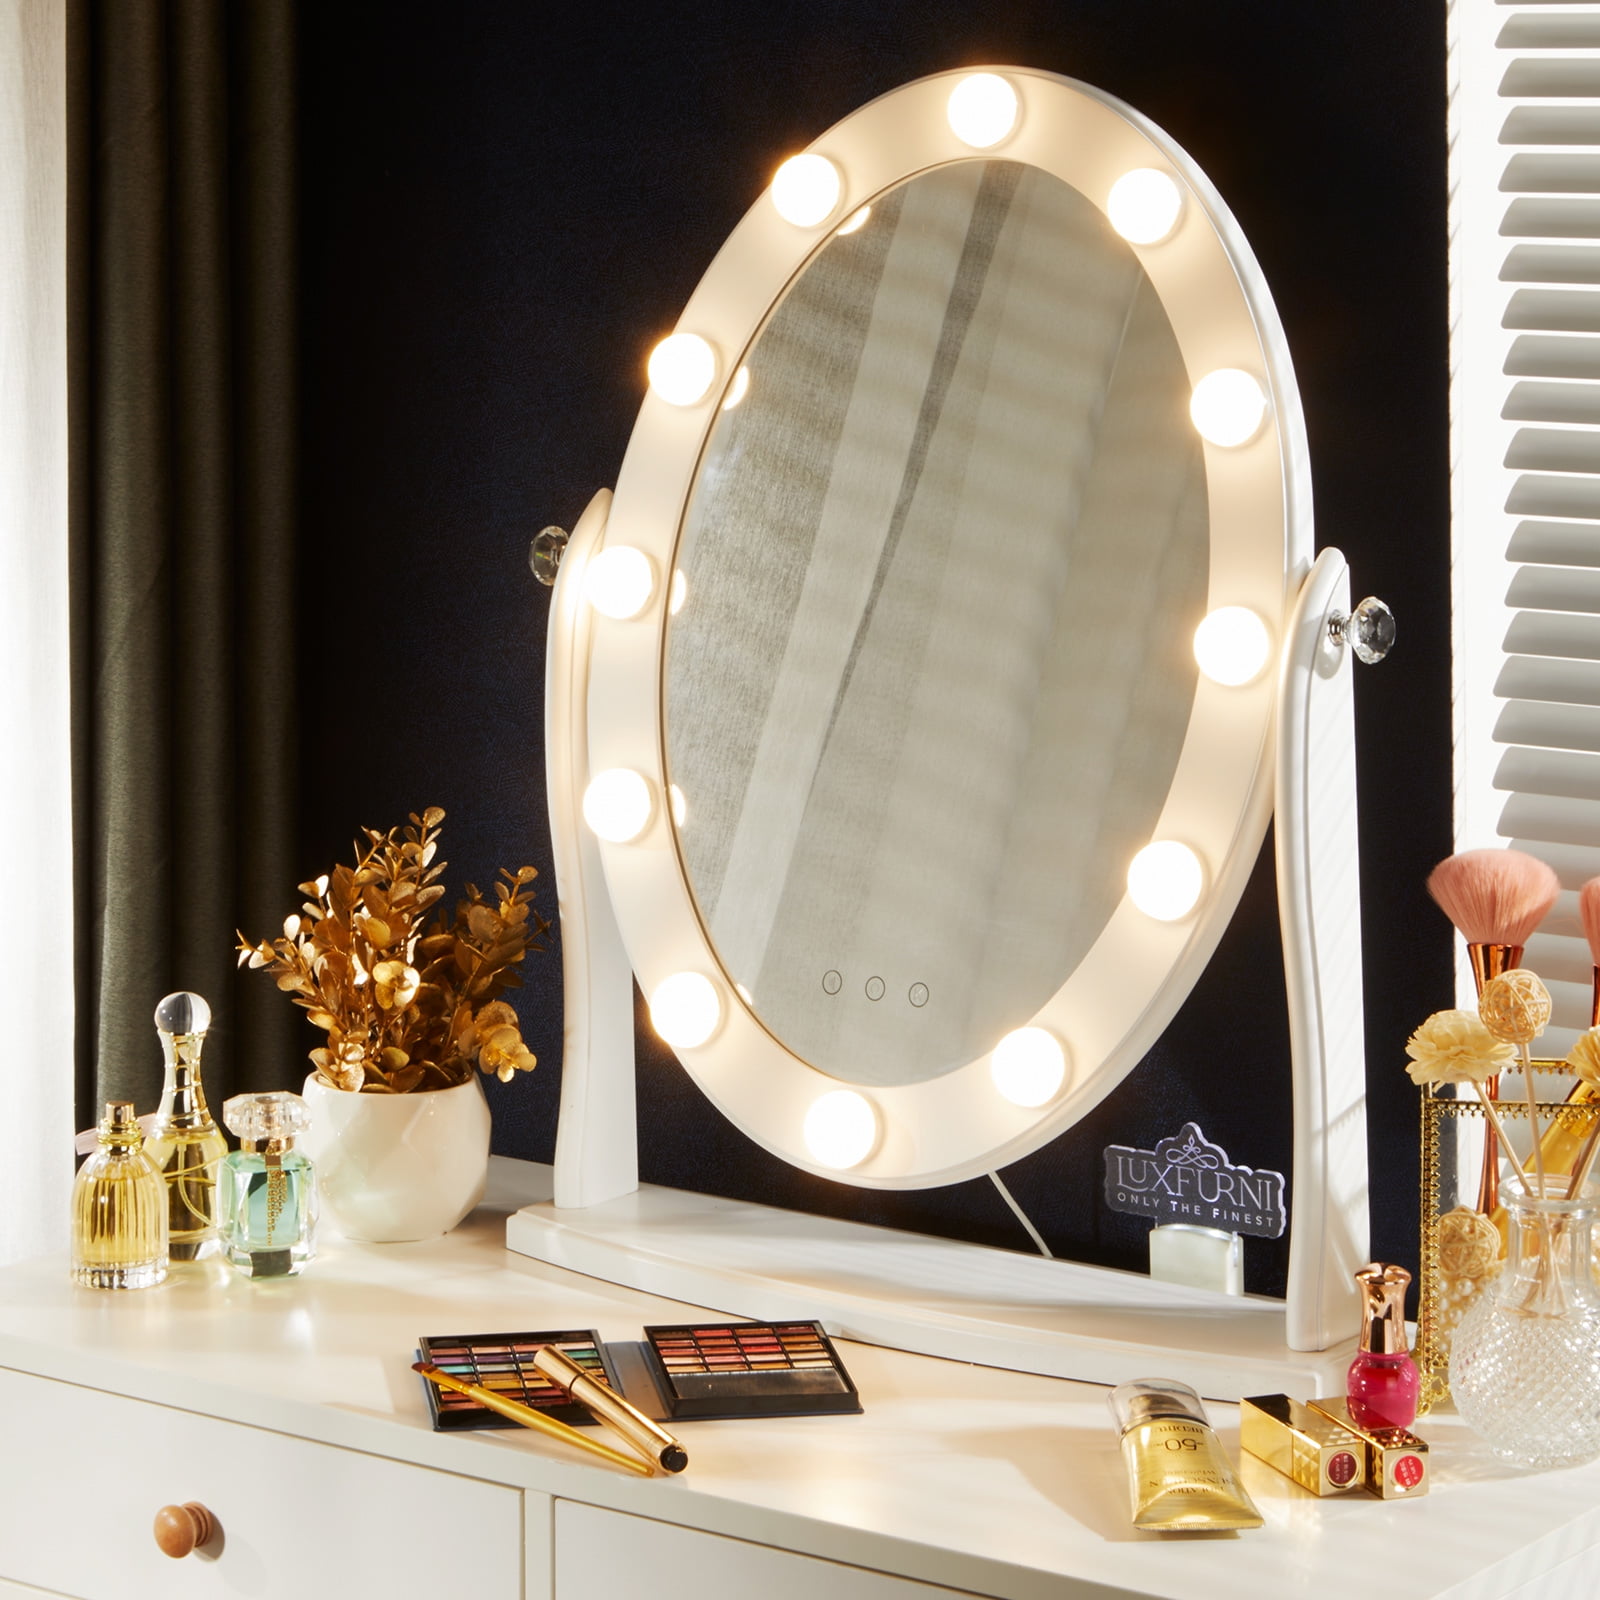 Chende LED Vanity Light for Mirror, Hollywood Style Makeup Lights with  Dimmer and 12V Adapter, Stick on Vanity Mirror, (Mirror Not Included)